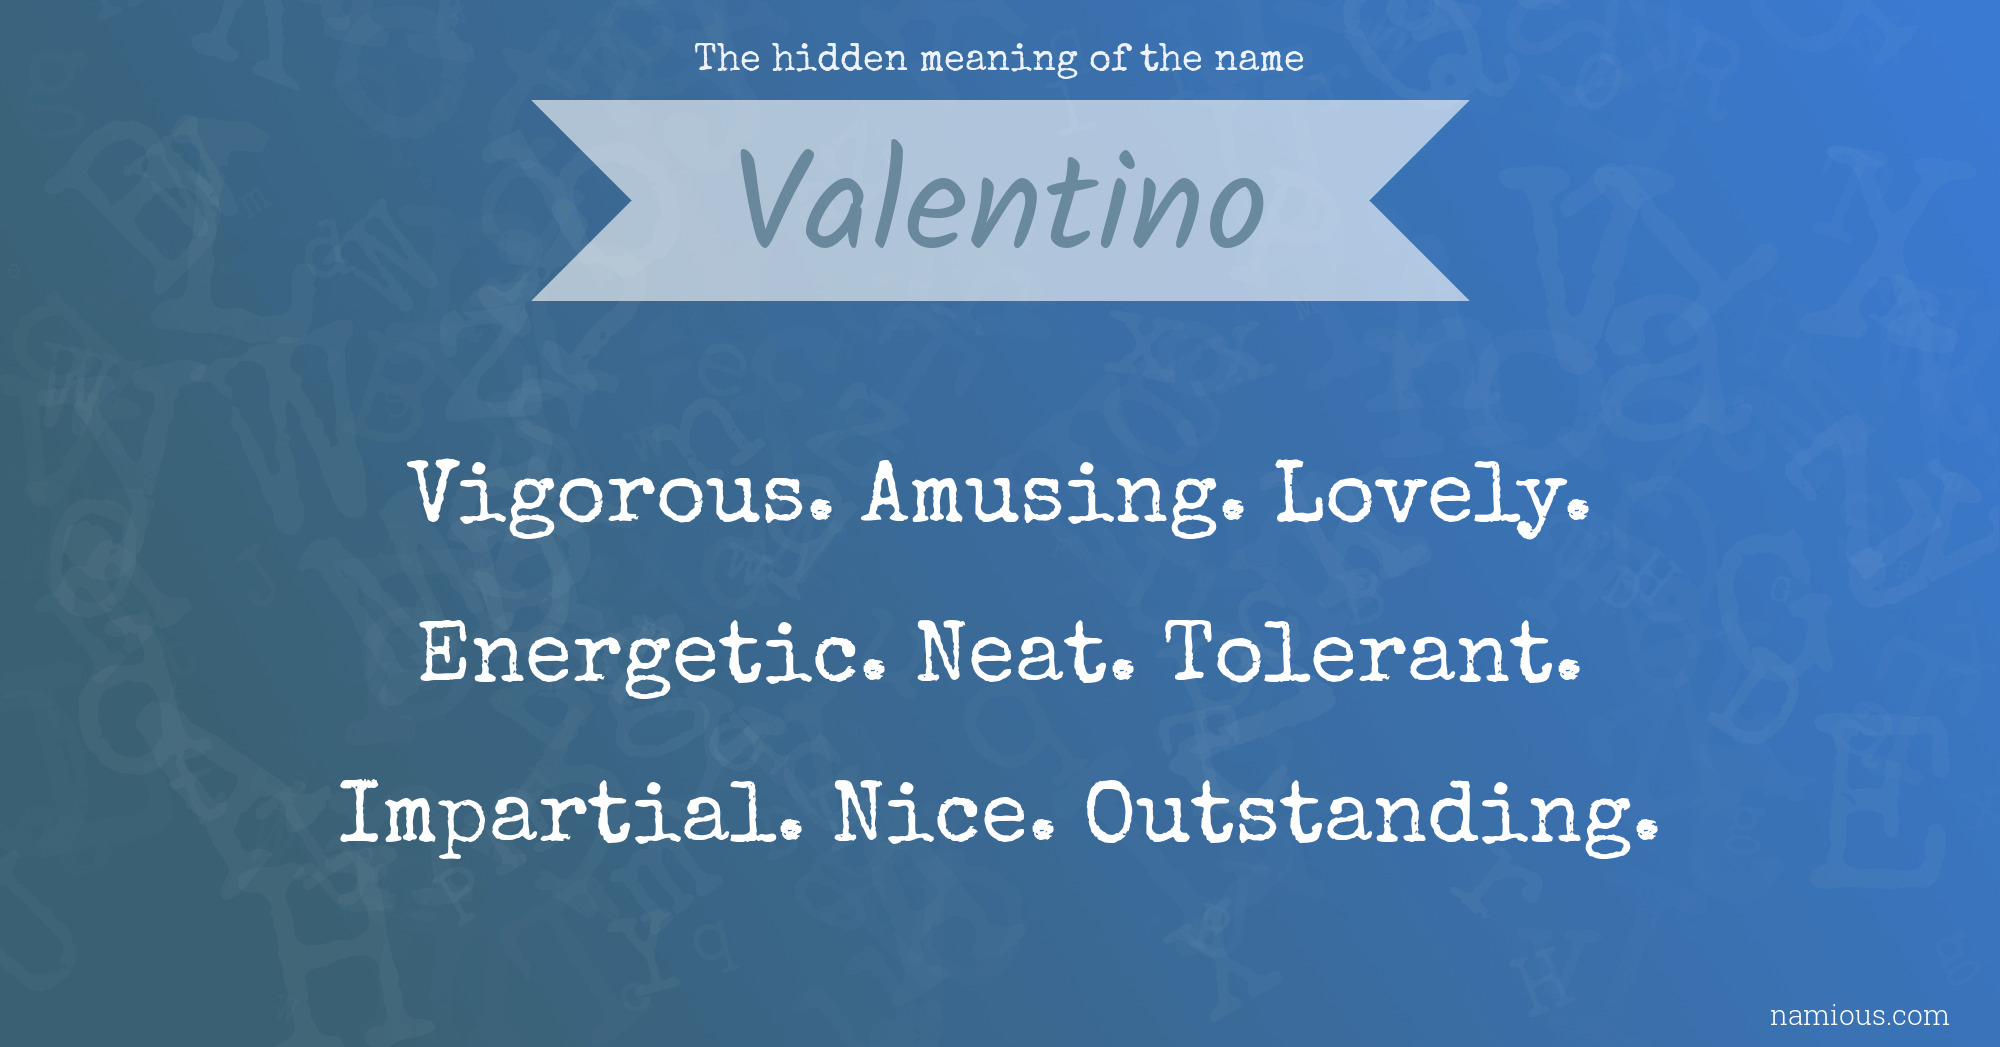 hidden meaning of the name Valentino | Namious